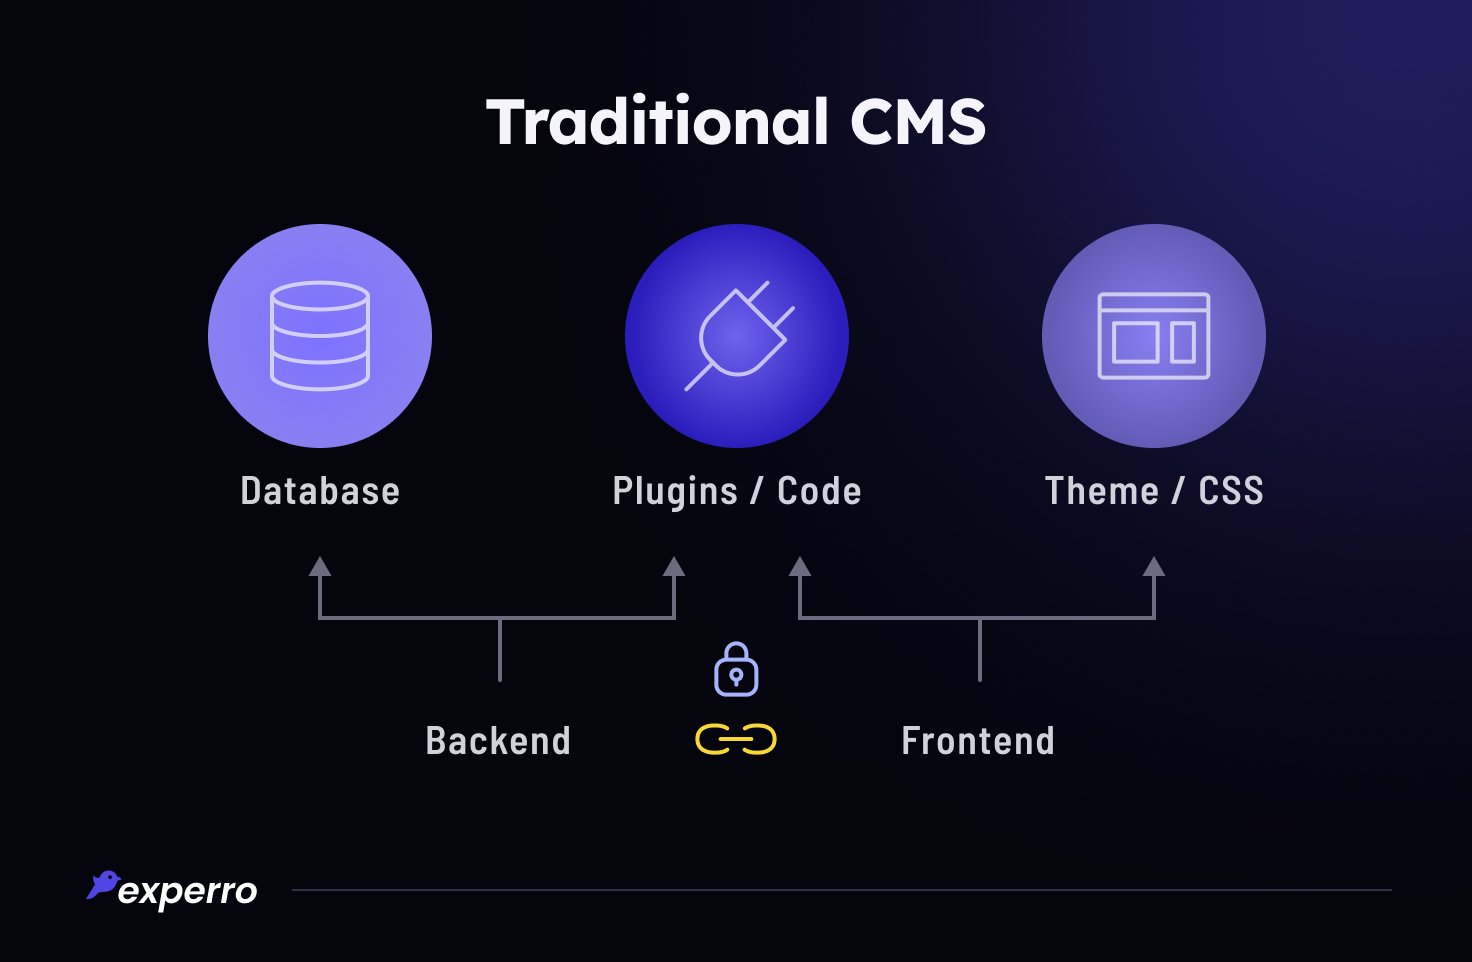 Traditional CMS Explained